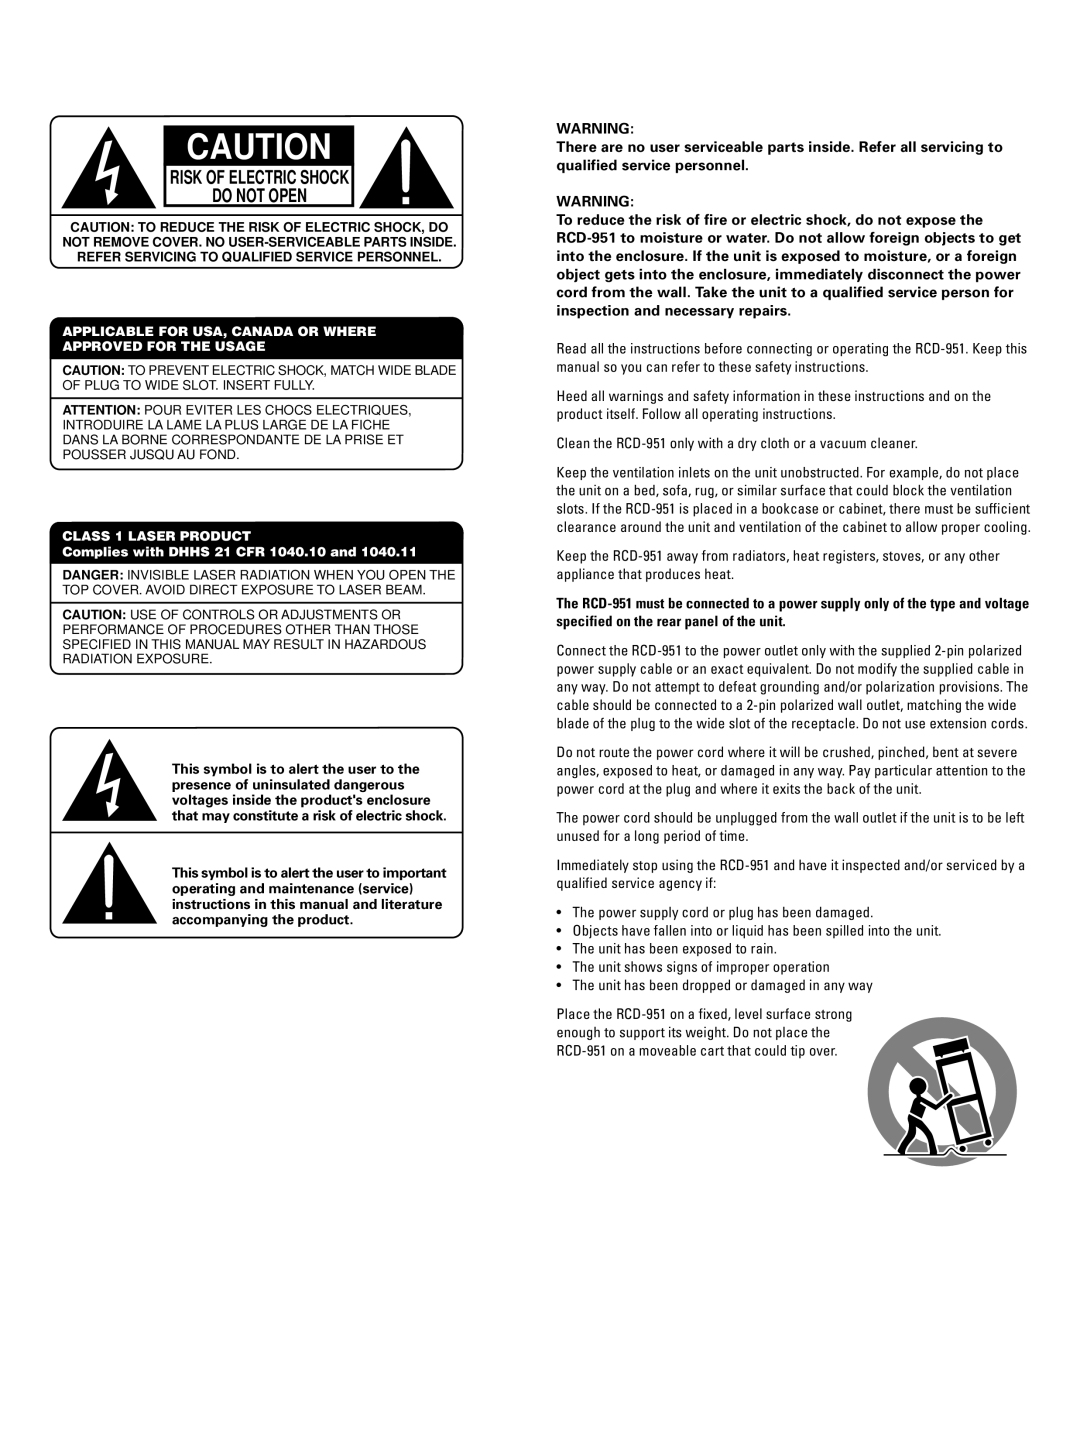 Rotel RCD-951 owner manual Risk Of Electric Shock Do Not Open 